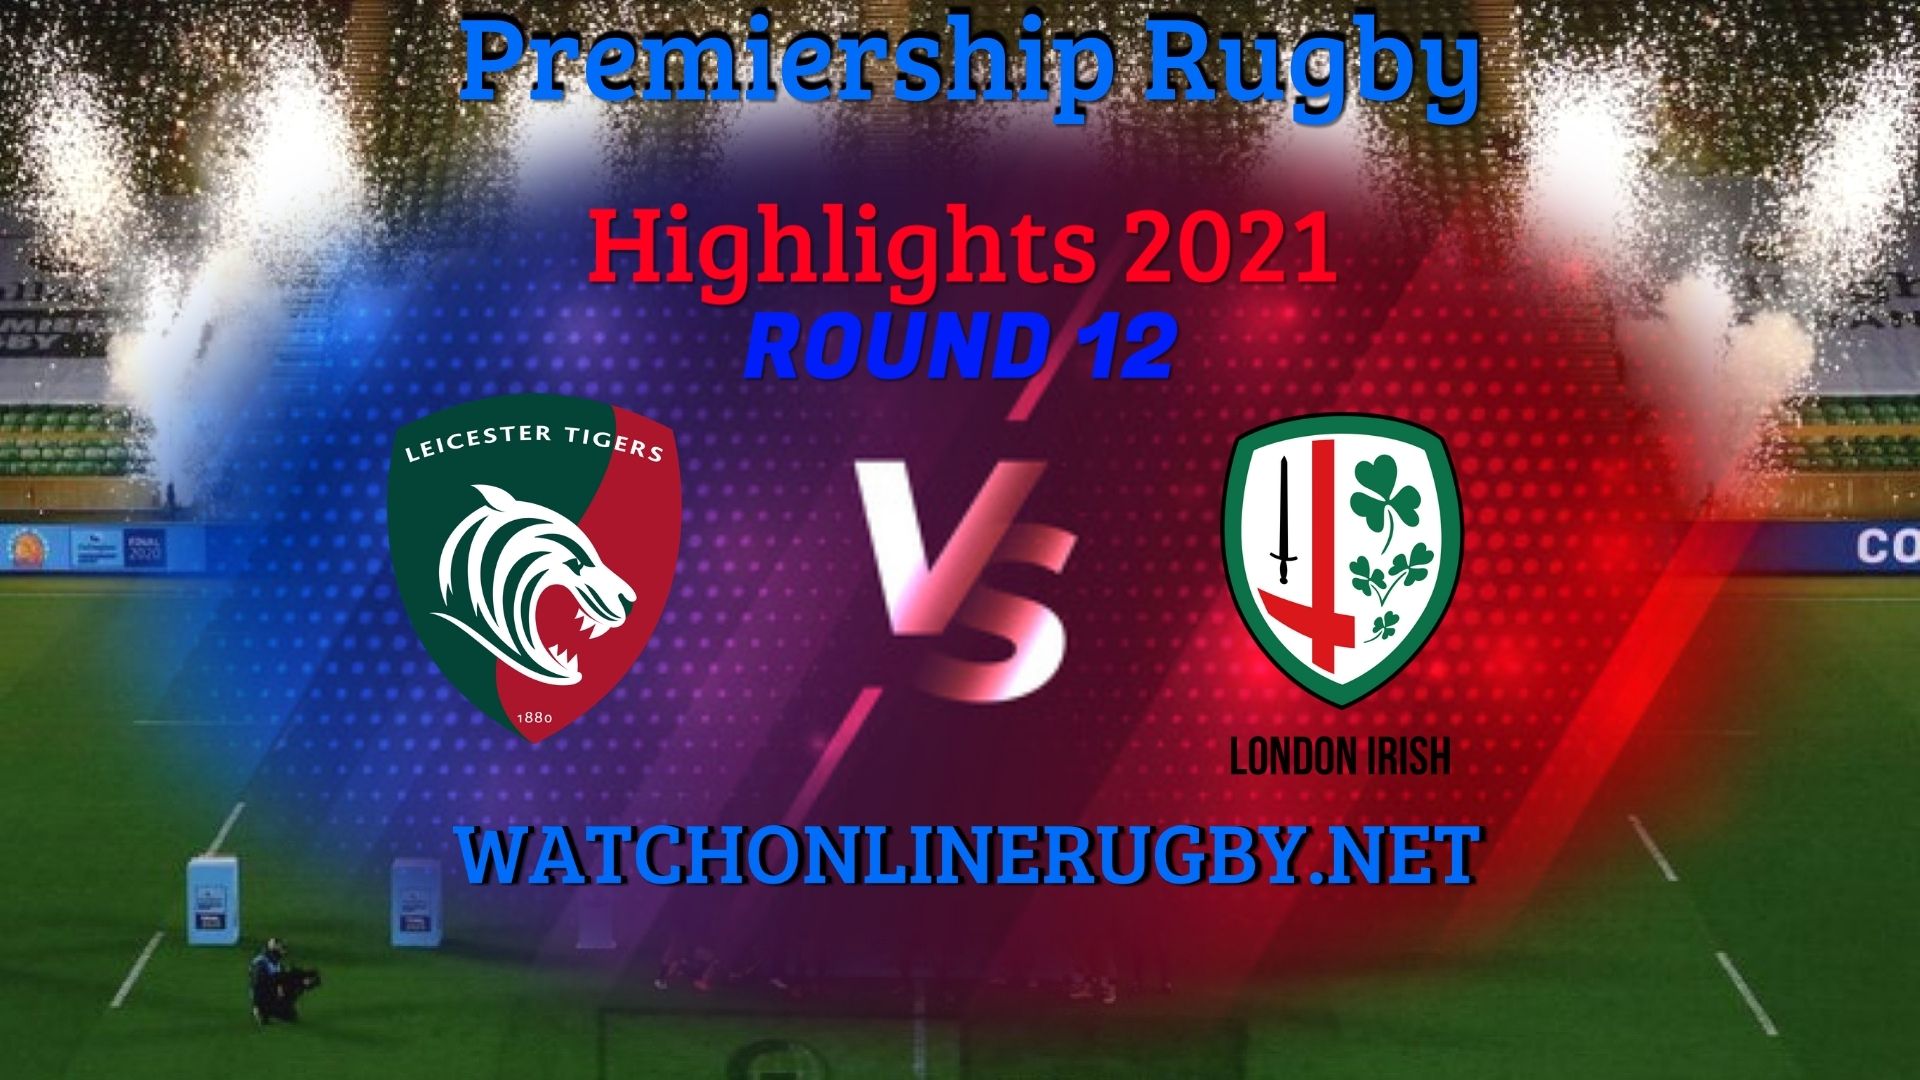 Leicester Tigers Vs London Irish Premiership Rugby 2021 RD 12